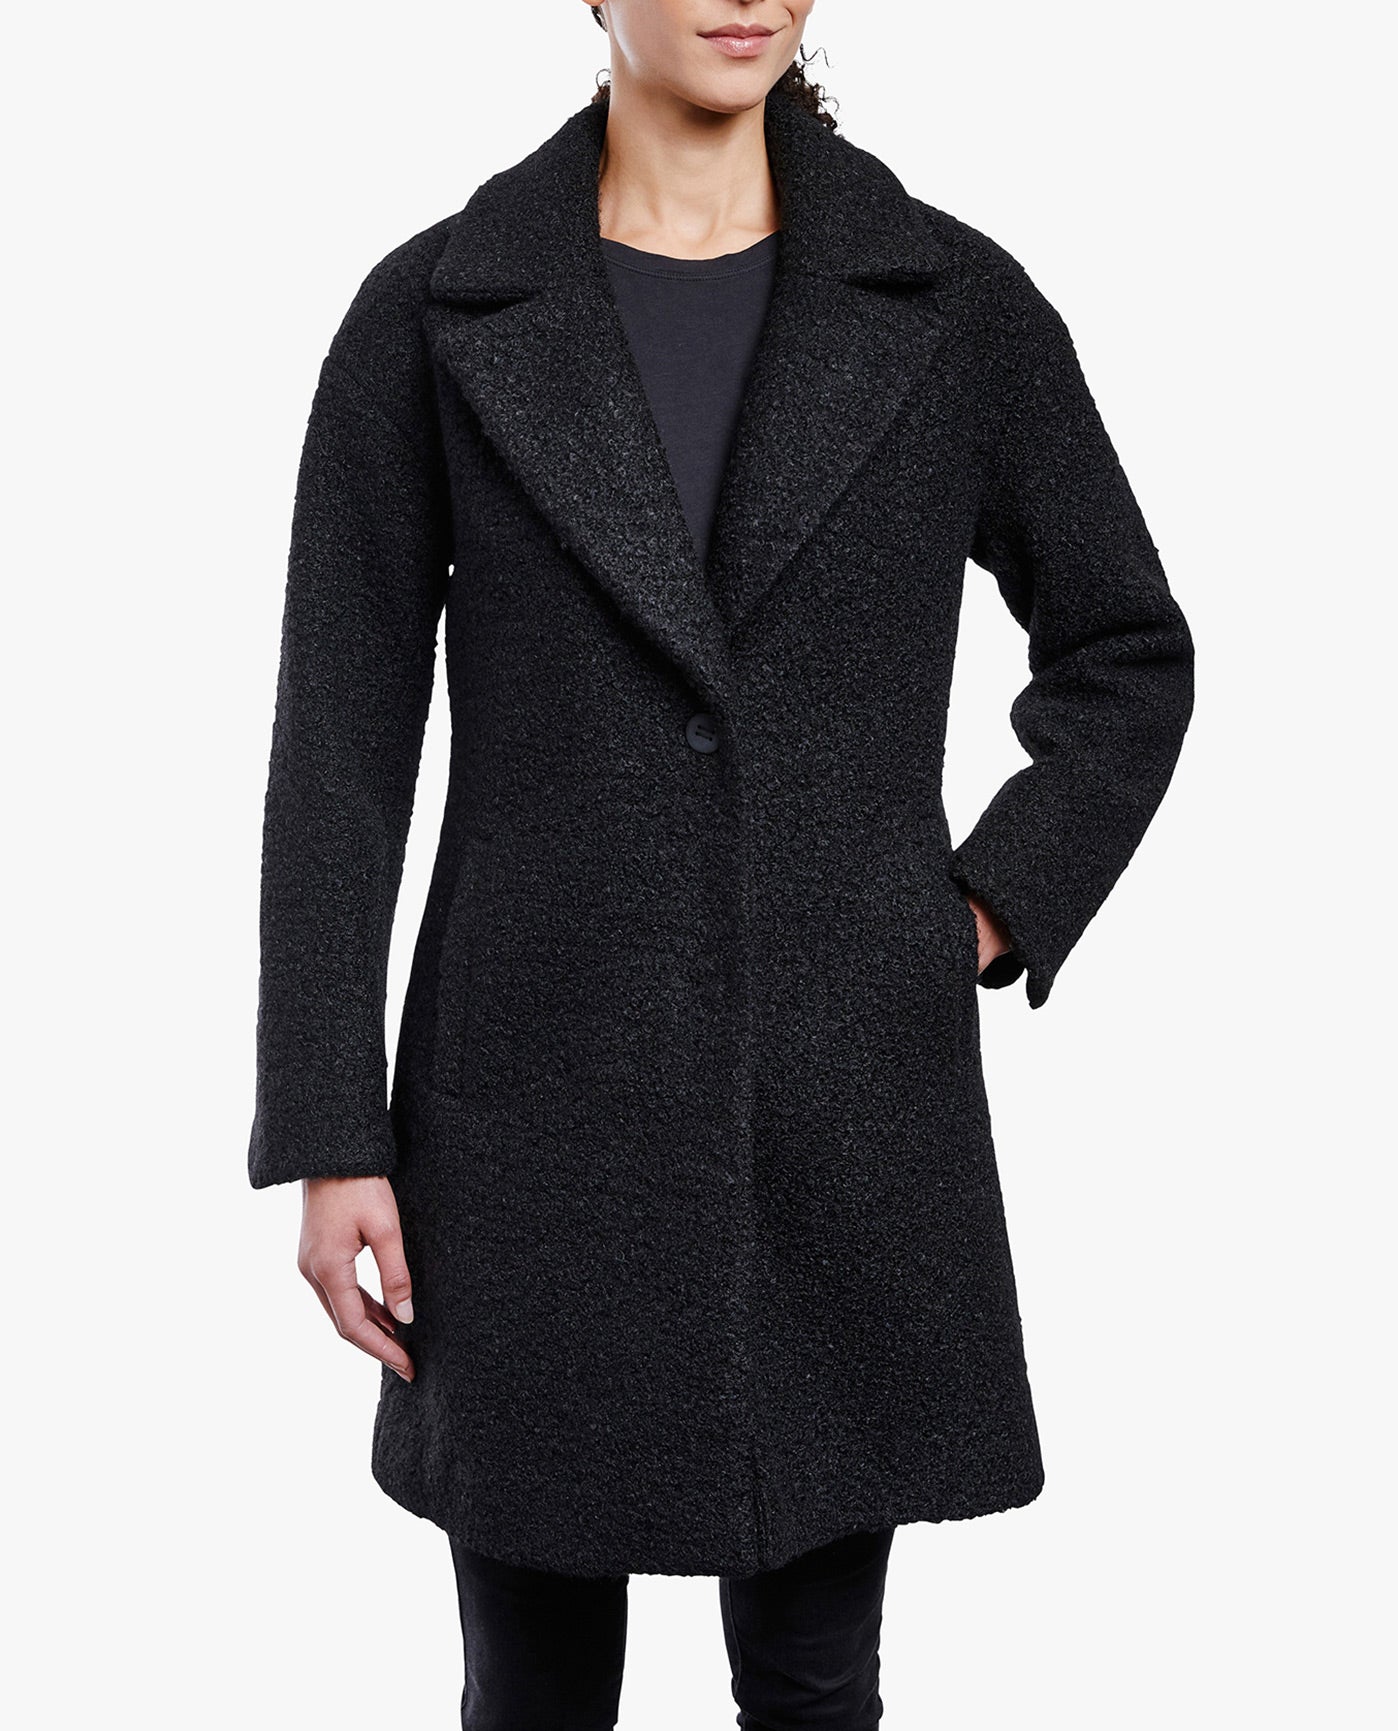 Front View Of SINGLE BUTTON-FRONT 35 INCH PEACOAT | BLACK